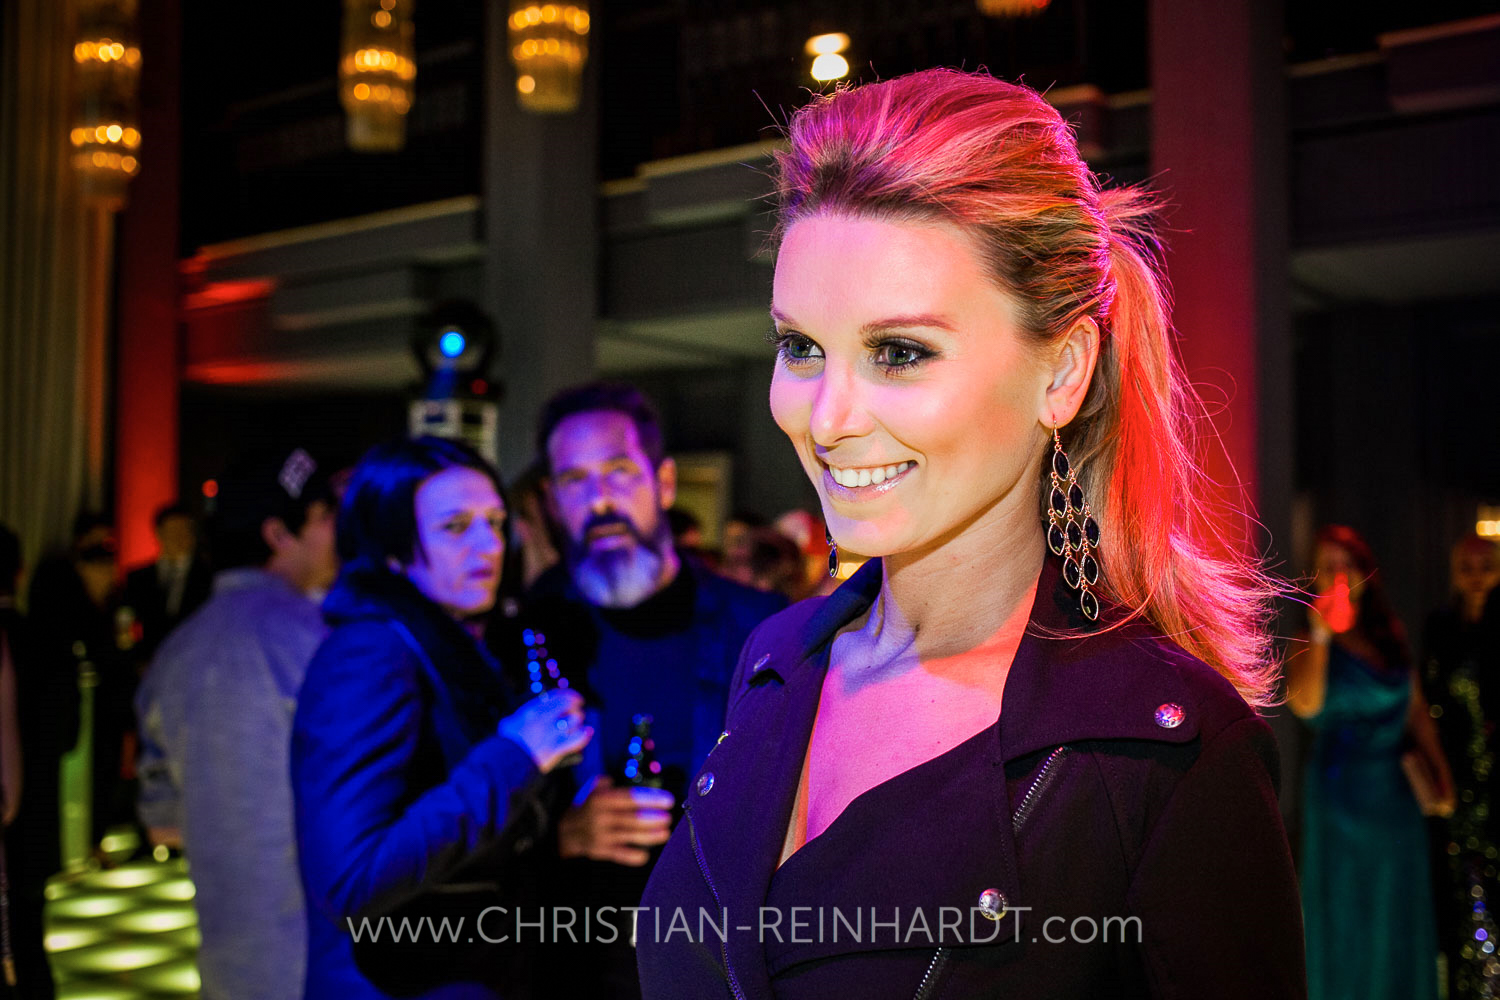 WUNDERLAND Entertainment - Berlinale-Aftershow-Party Berlin